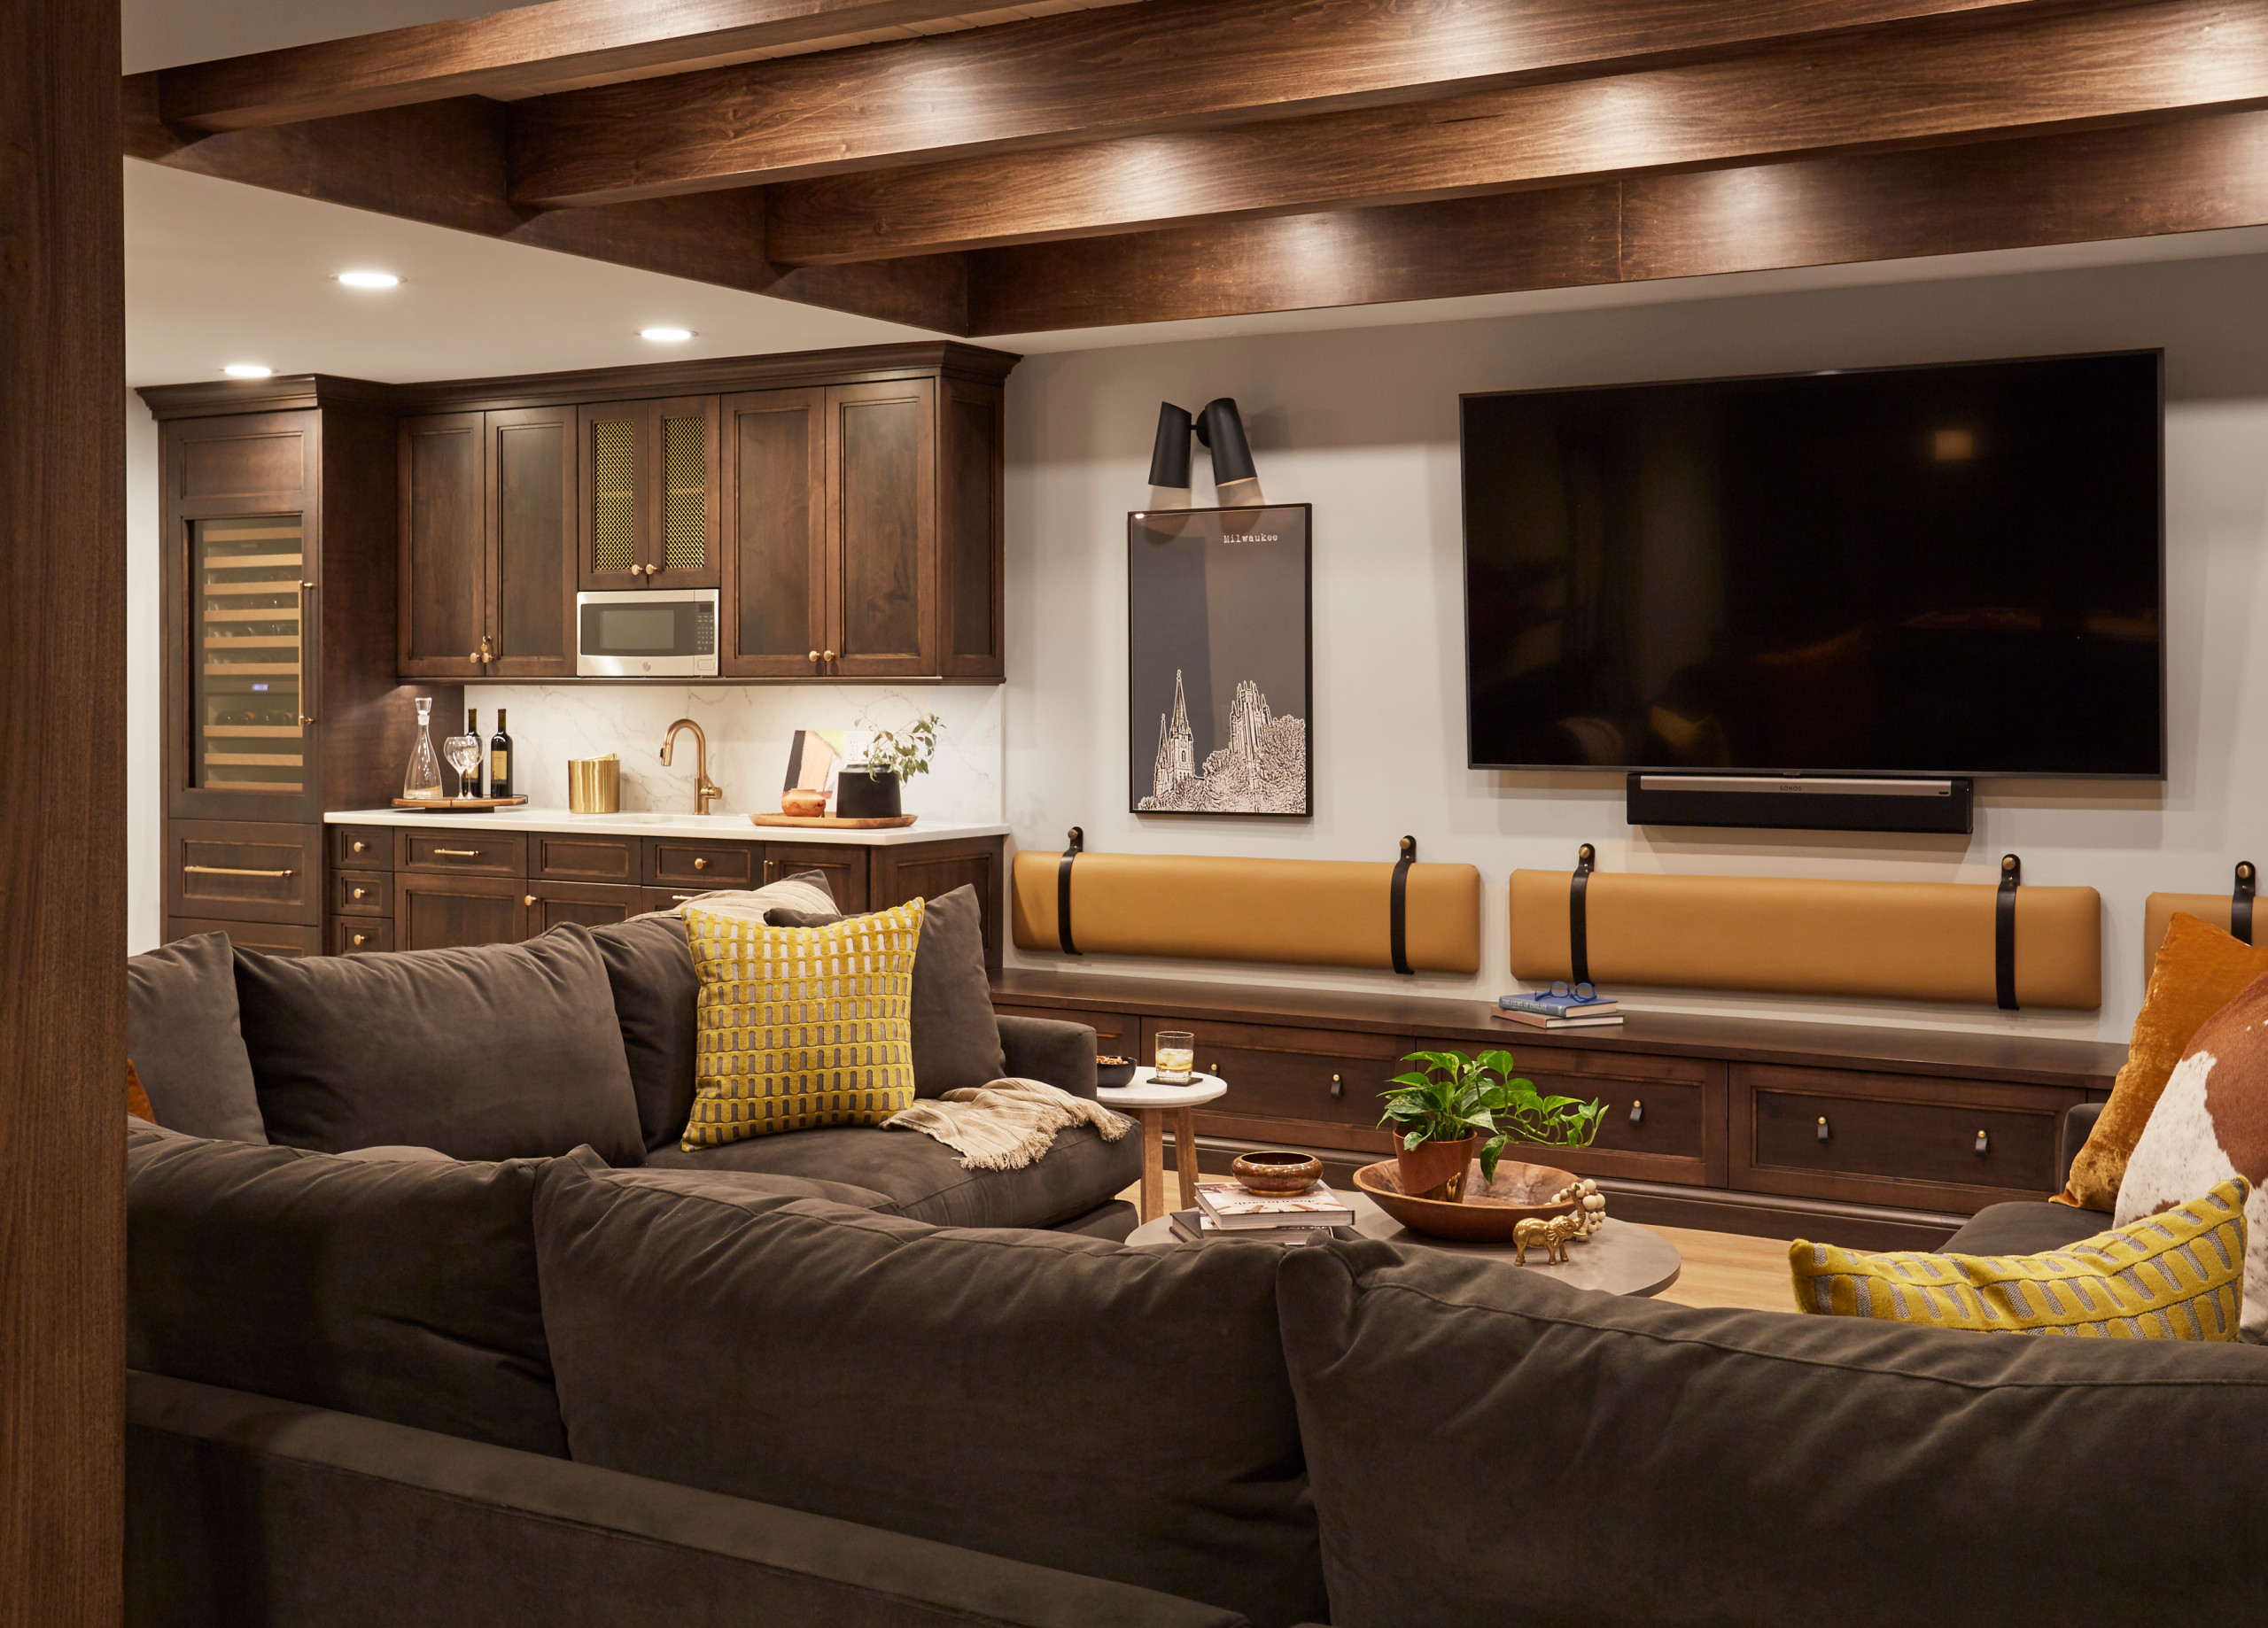 75 Beautiful All Ceiling Designs Basement Pictures Ideas July 2021 Houzz